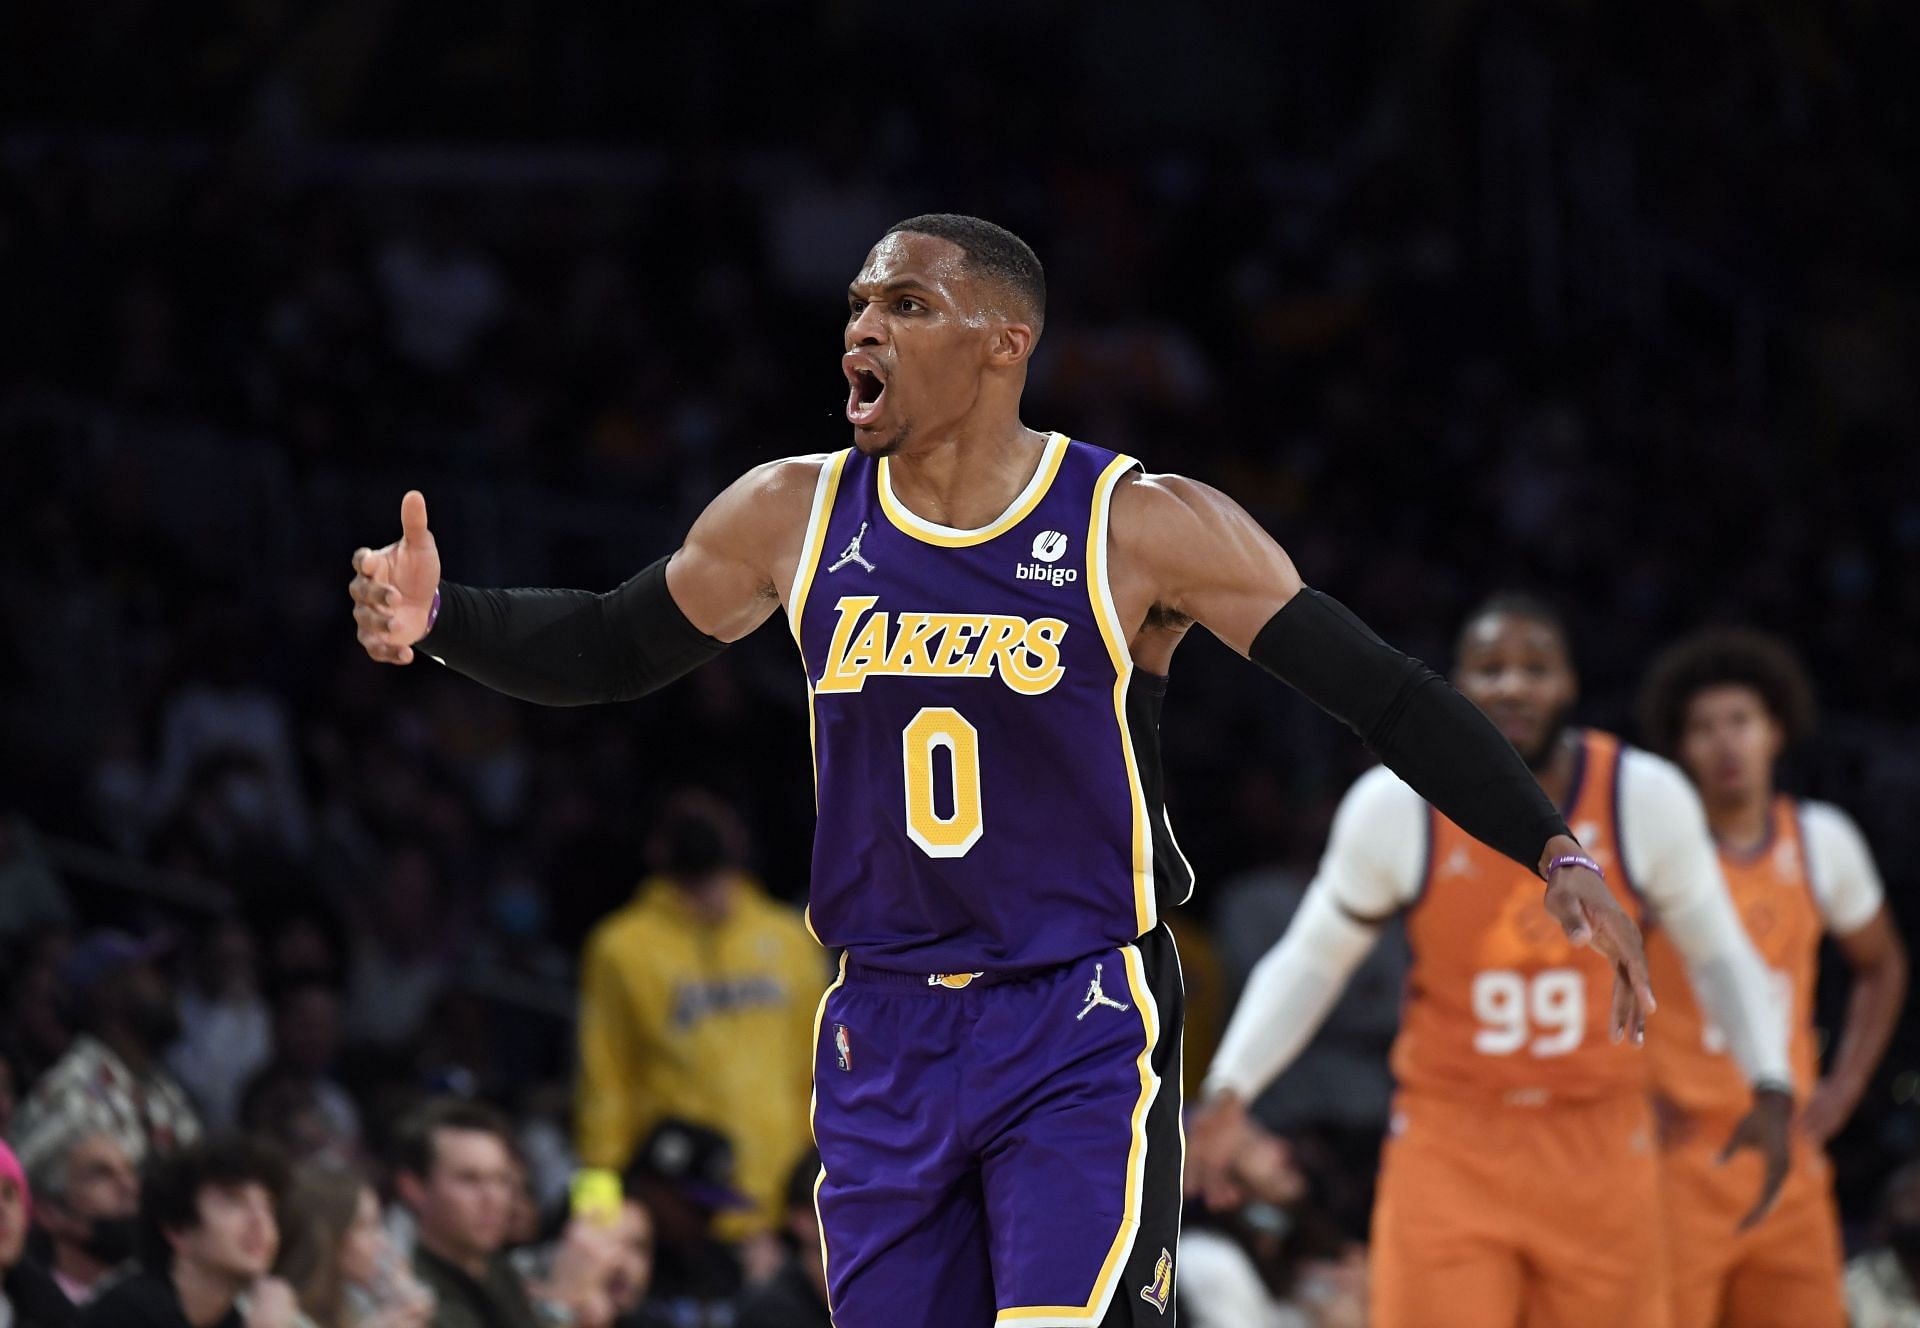 Russell Westbrook had a costly 10 turnovers for the LA Lakers against the Oklahoma City Thunder